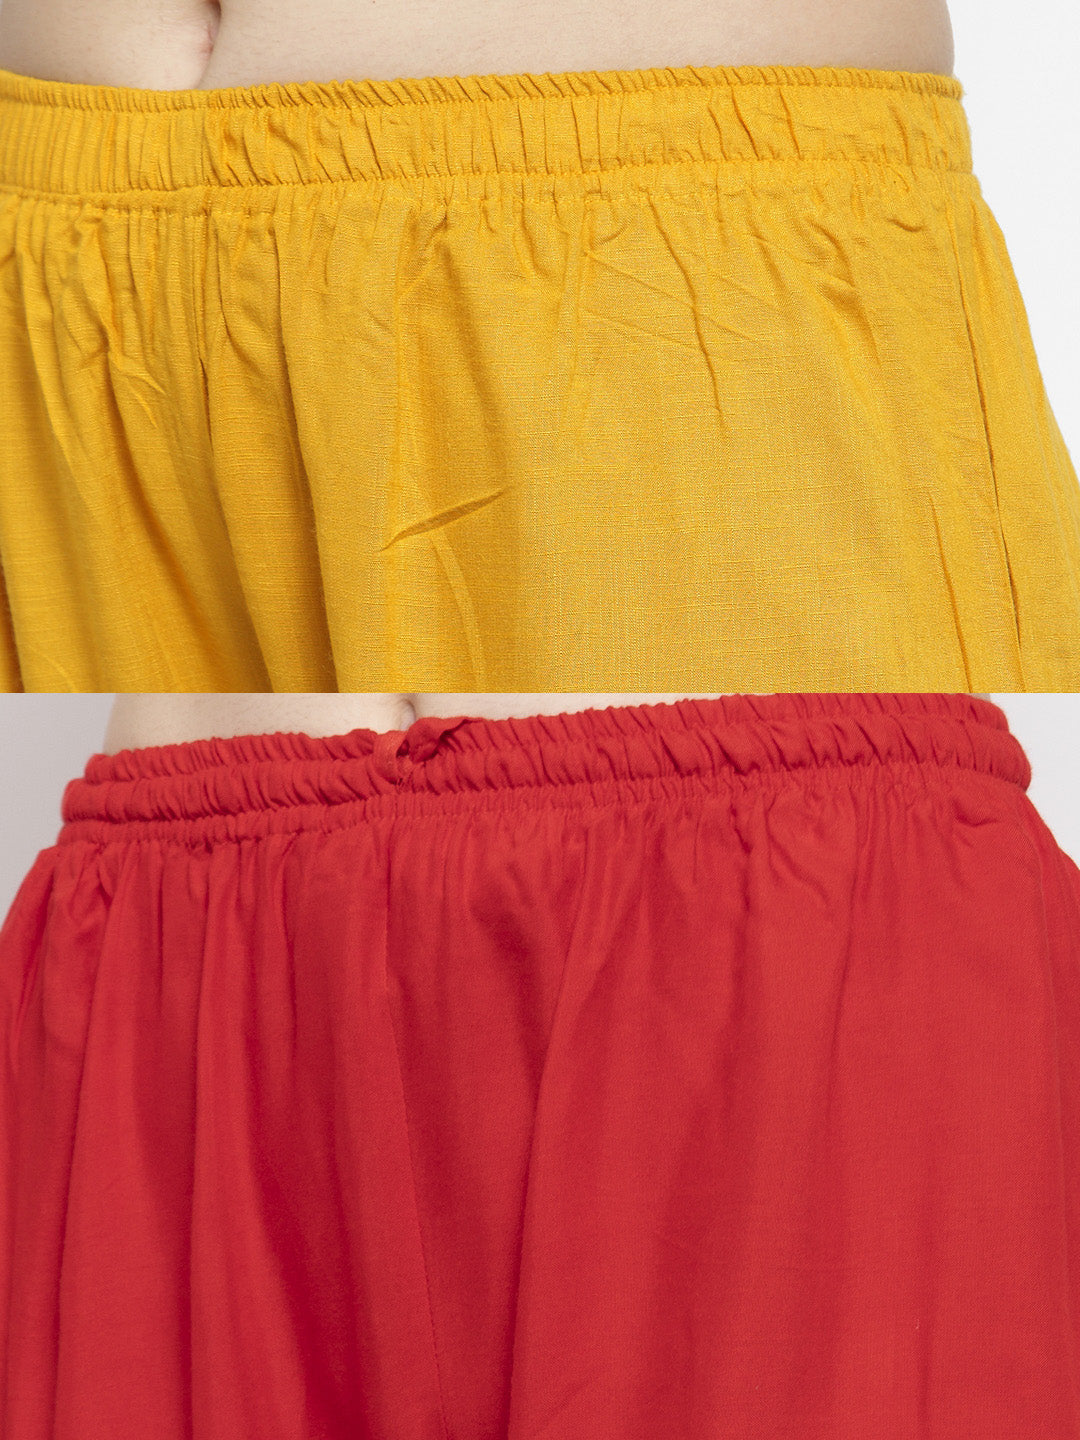 Clora Solid Mustard & Red Rayon Palazzo (Pack Of 2)